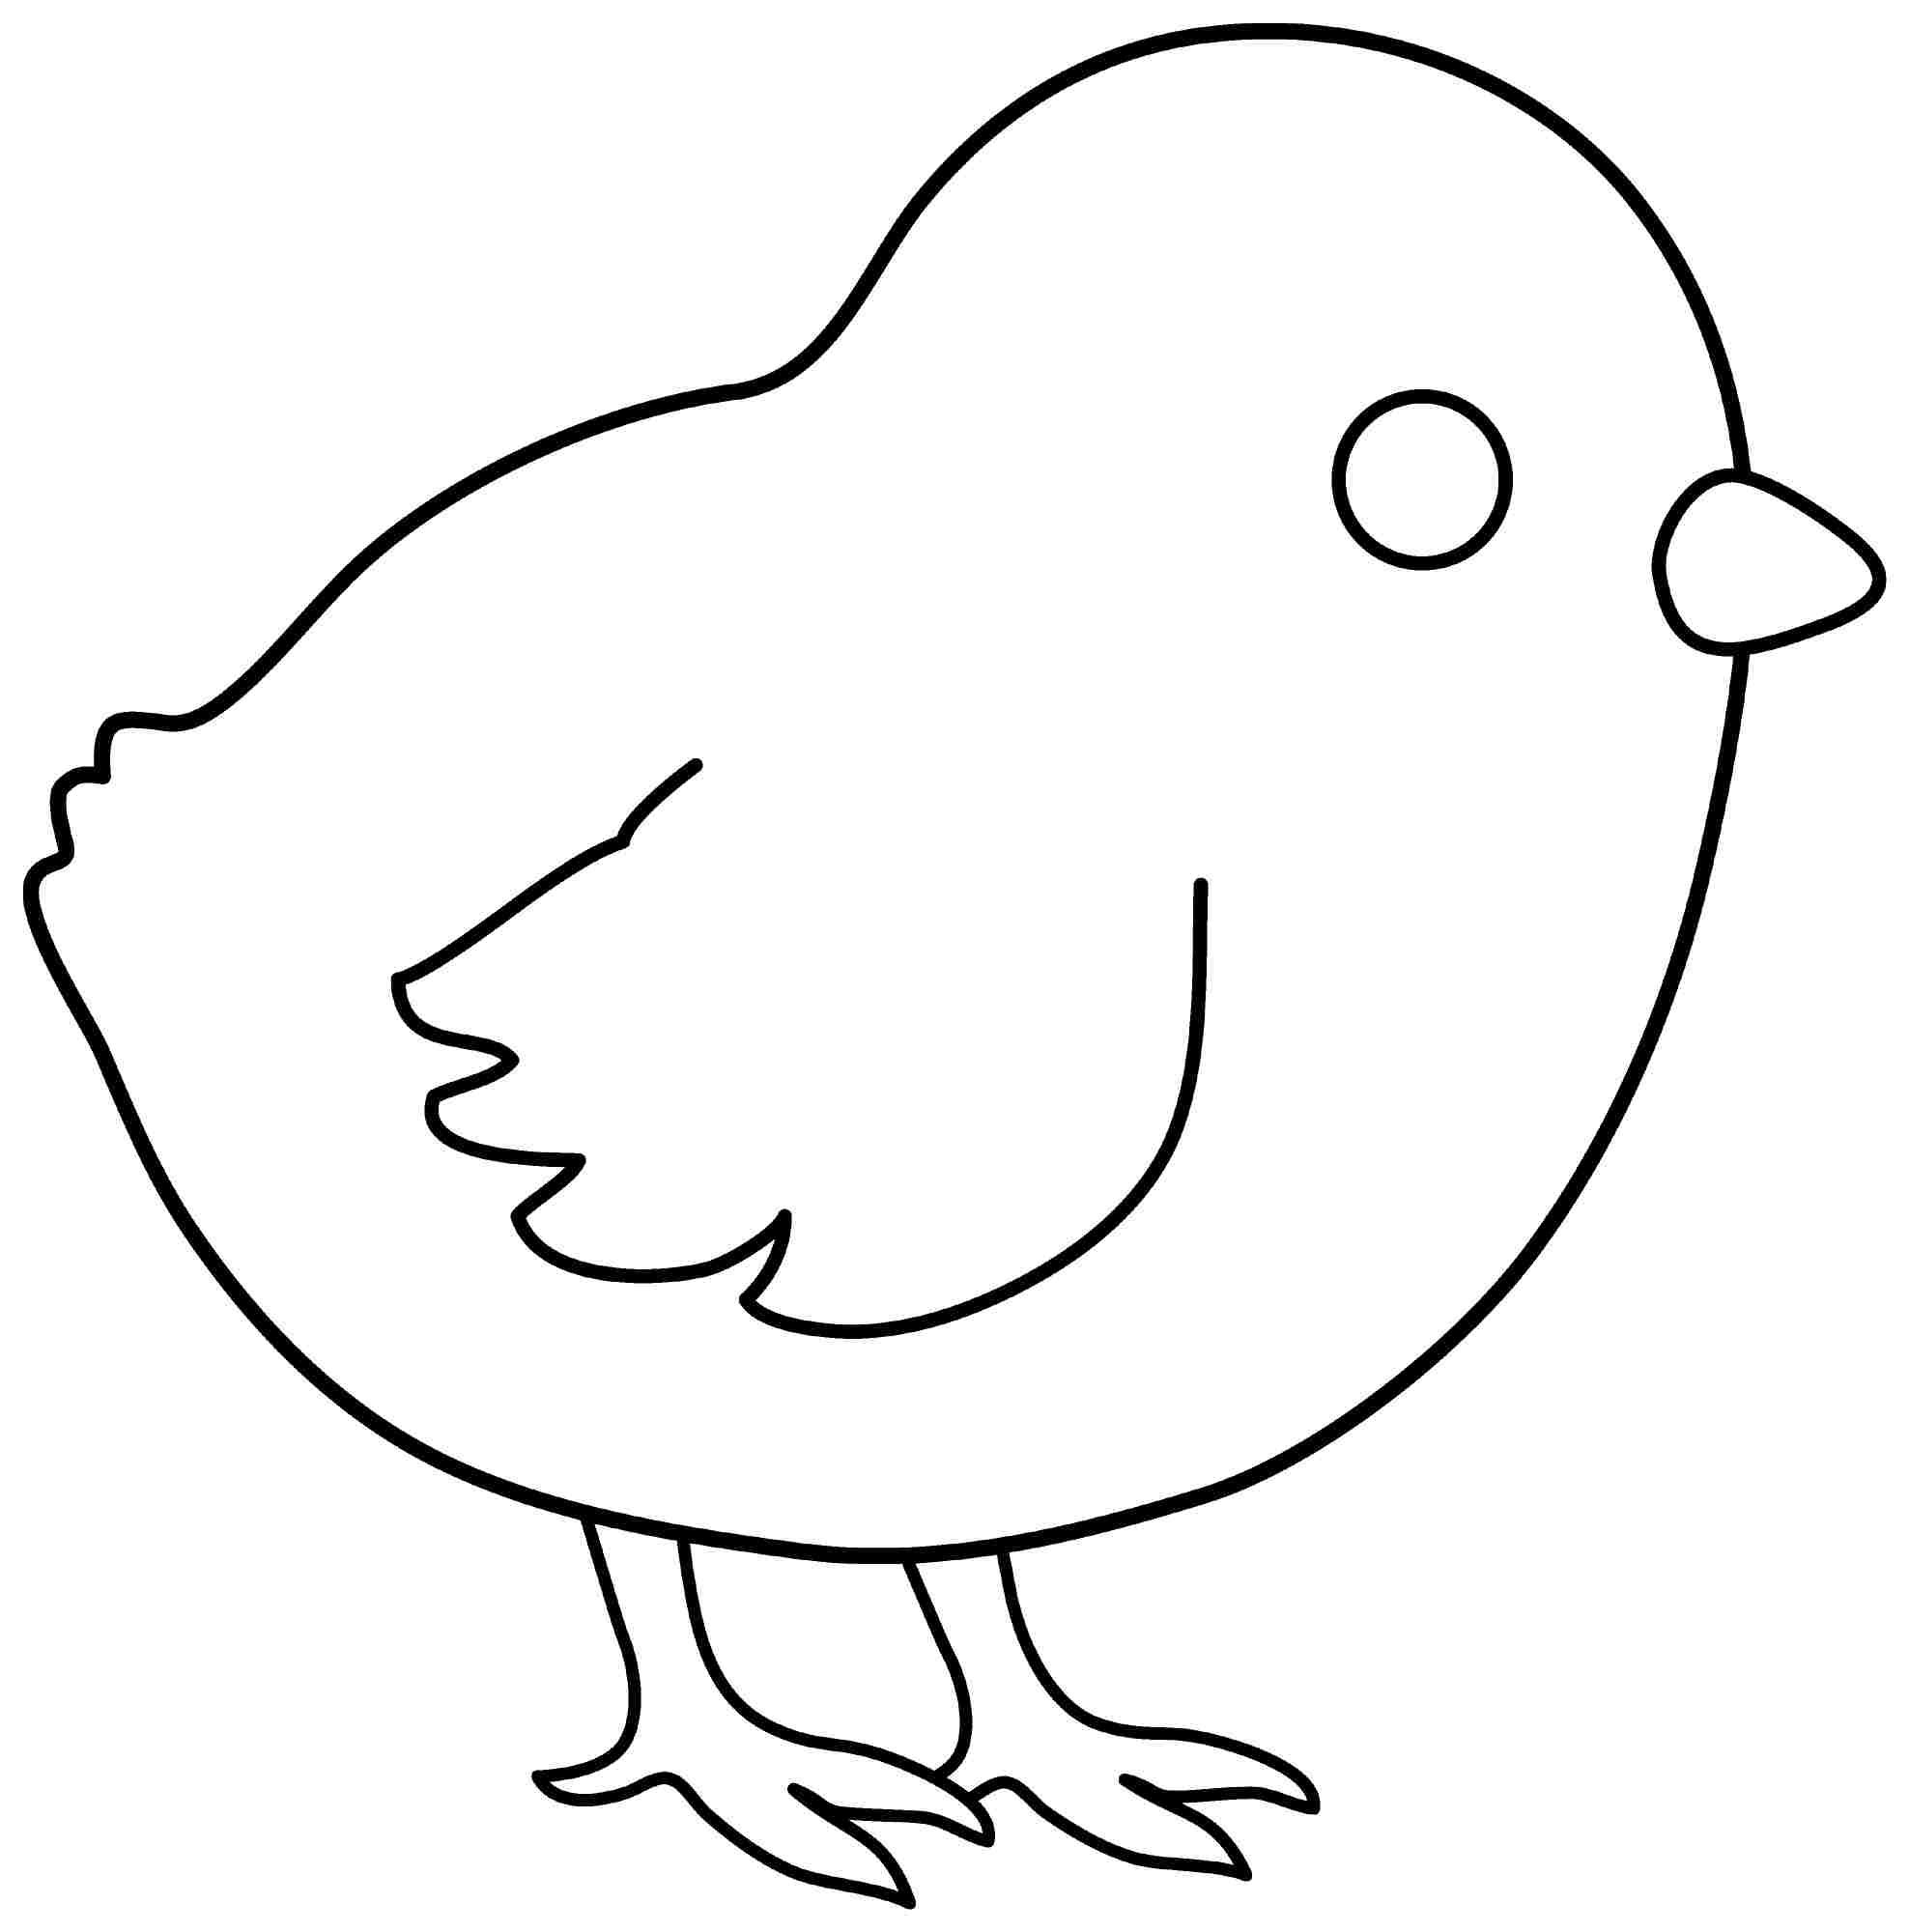 7-best-images-of-printable-chick-and-chicken-baby-chick-outline-coloring-home